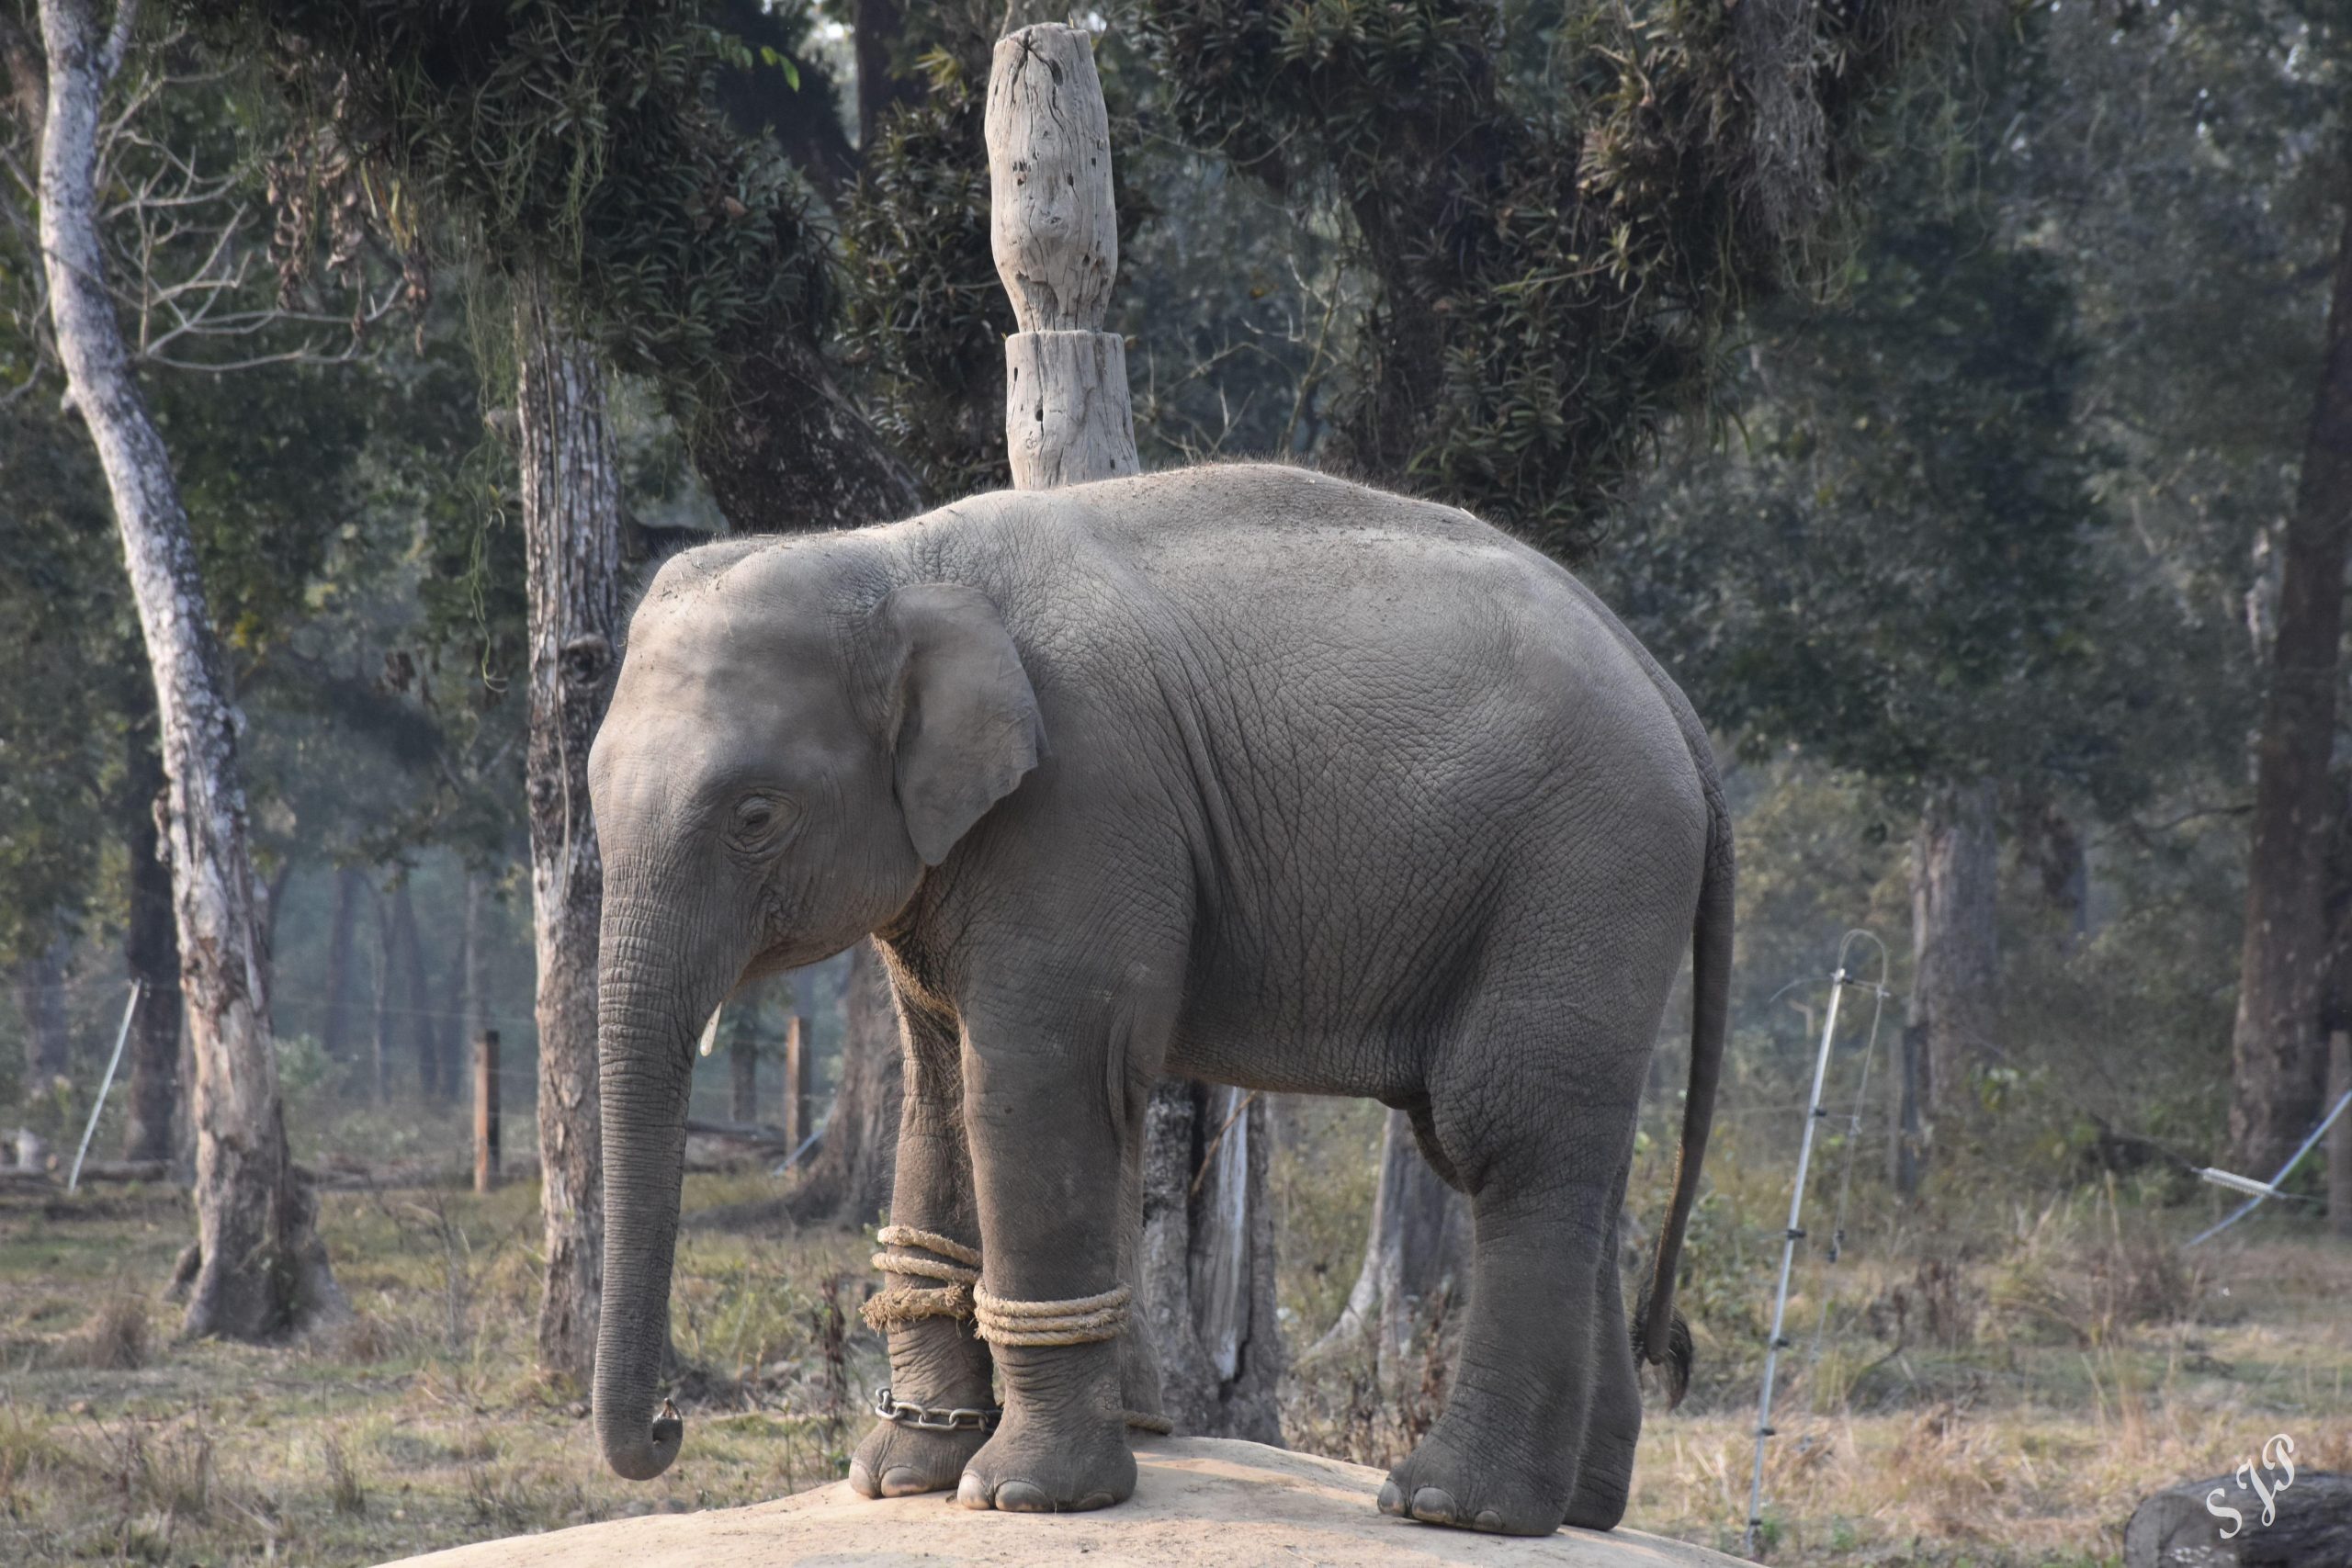 A young calf going under an intense training in Elephant Breeding Centre, Chitwan National Park